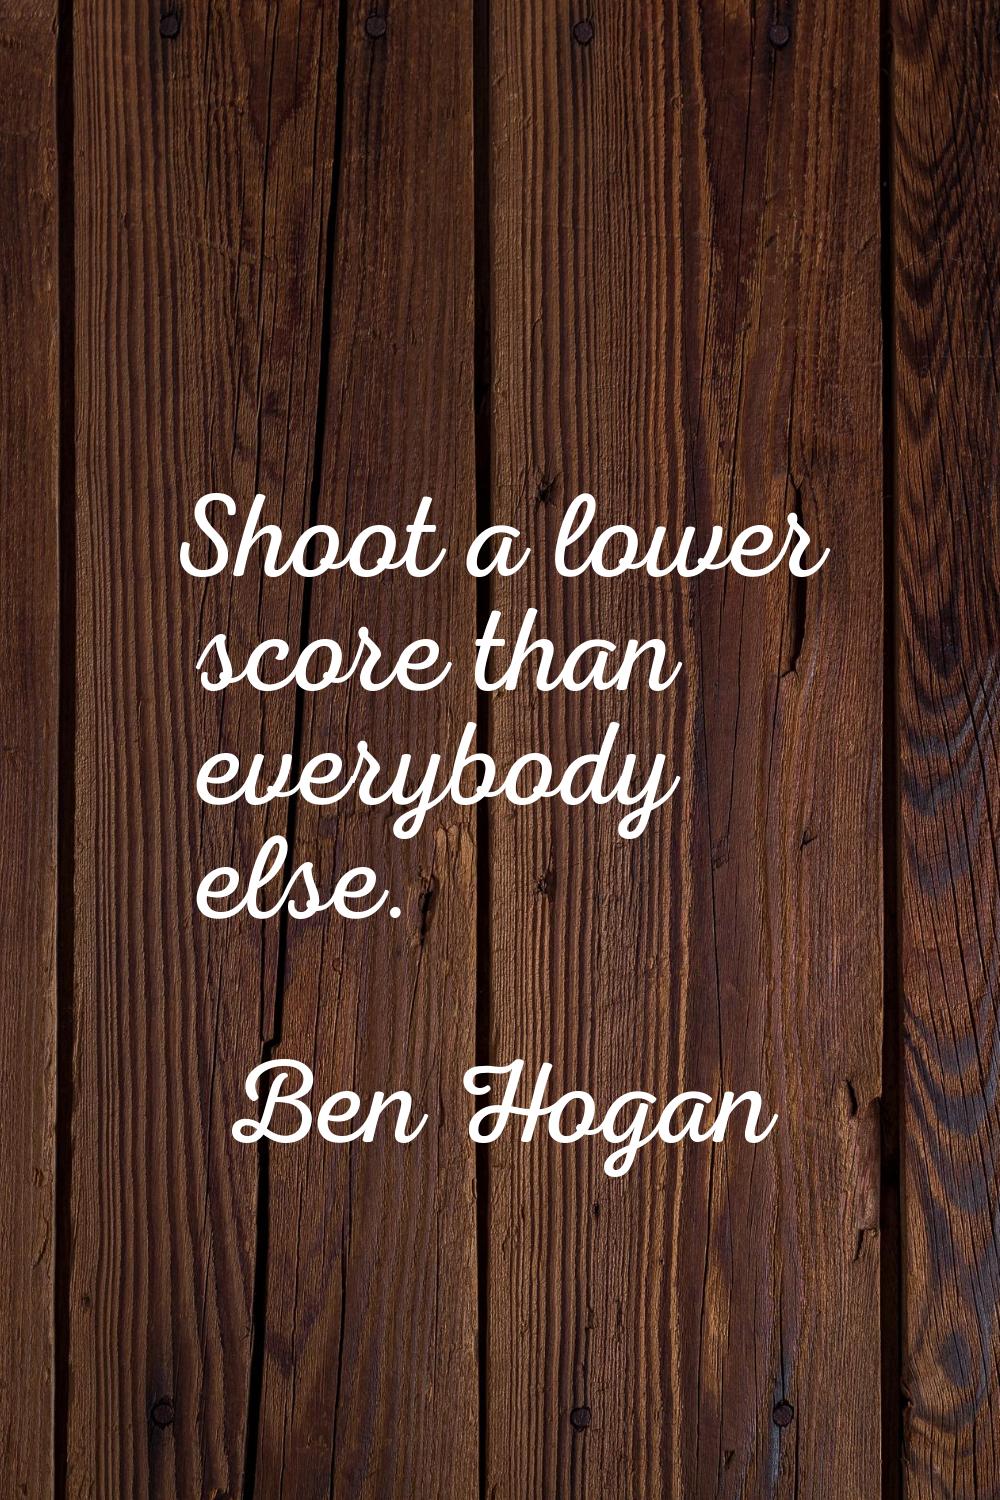 Shoot a lower score than everybody else.